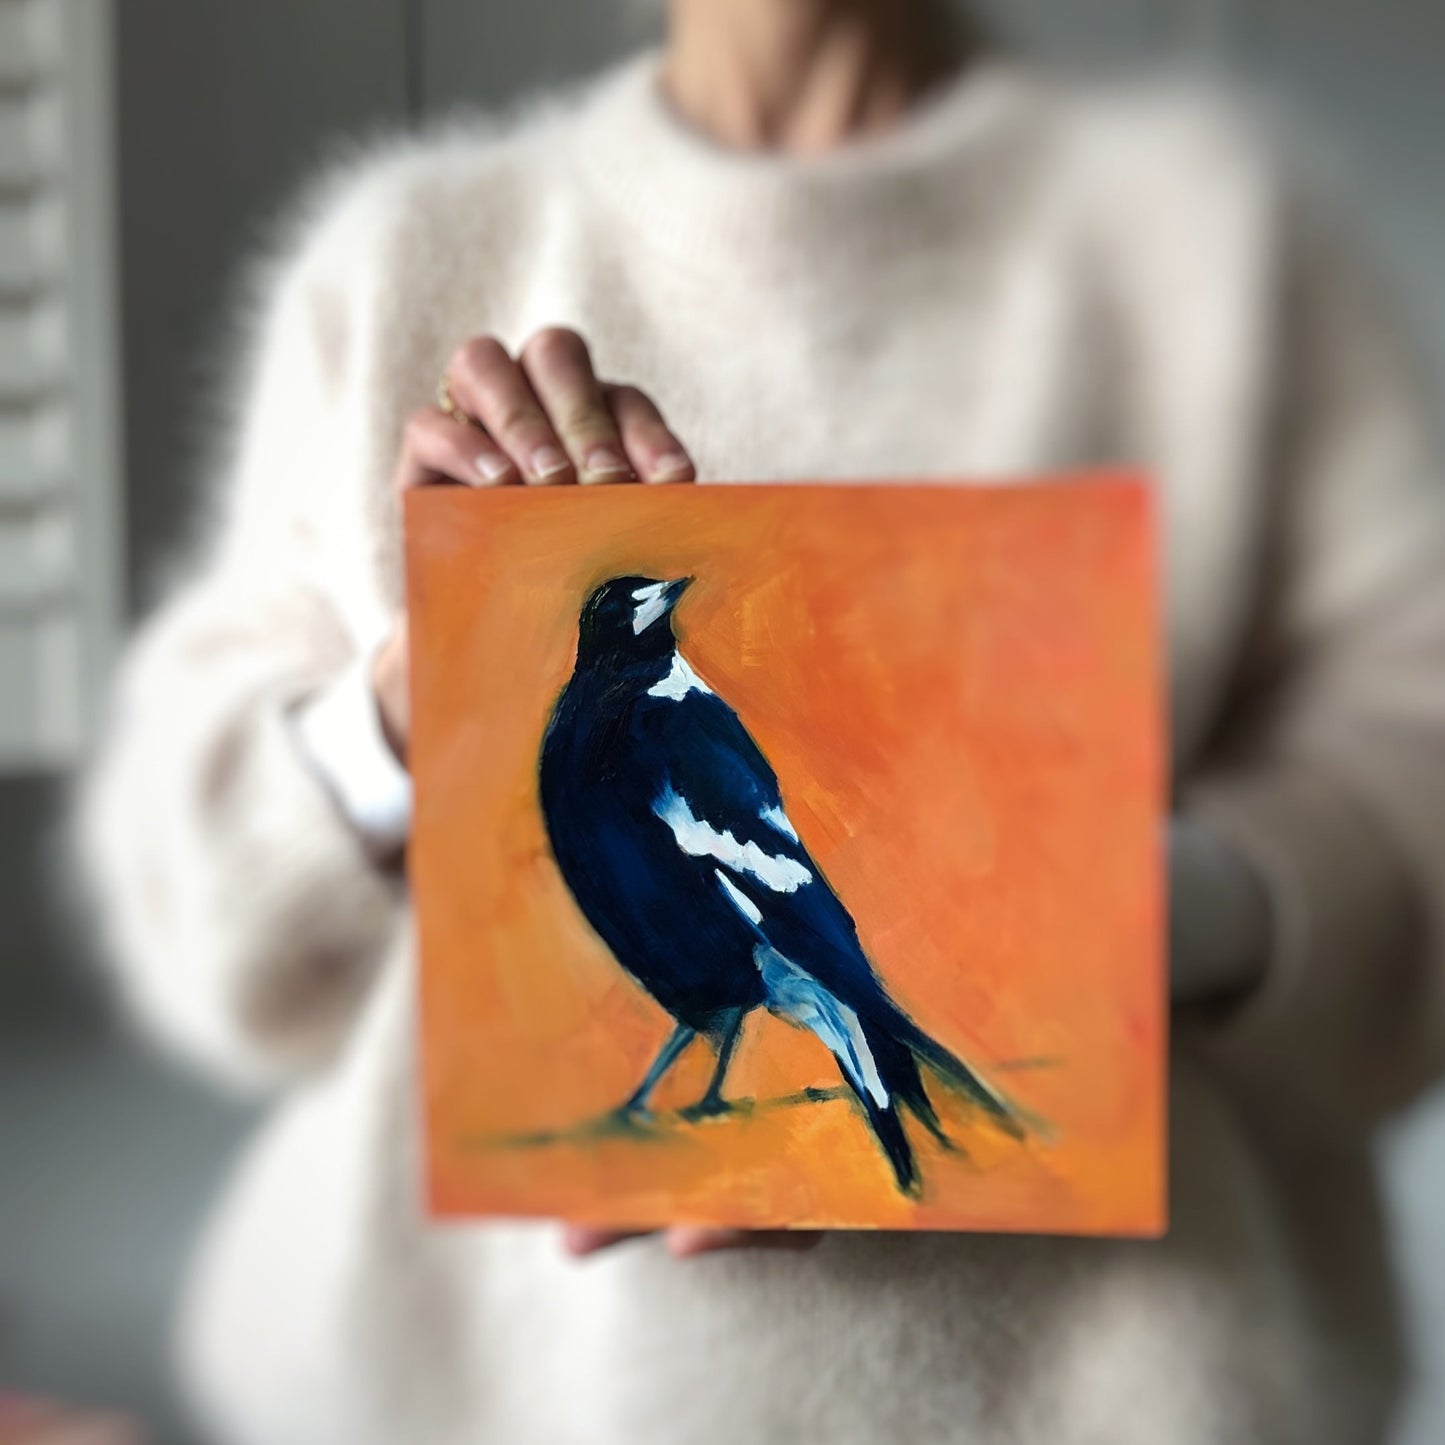 image of a person holding an impressionistic oil painting of a navy blue and white magpie looking up on a bright and textured orange background